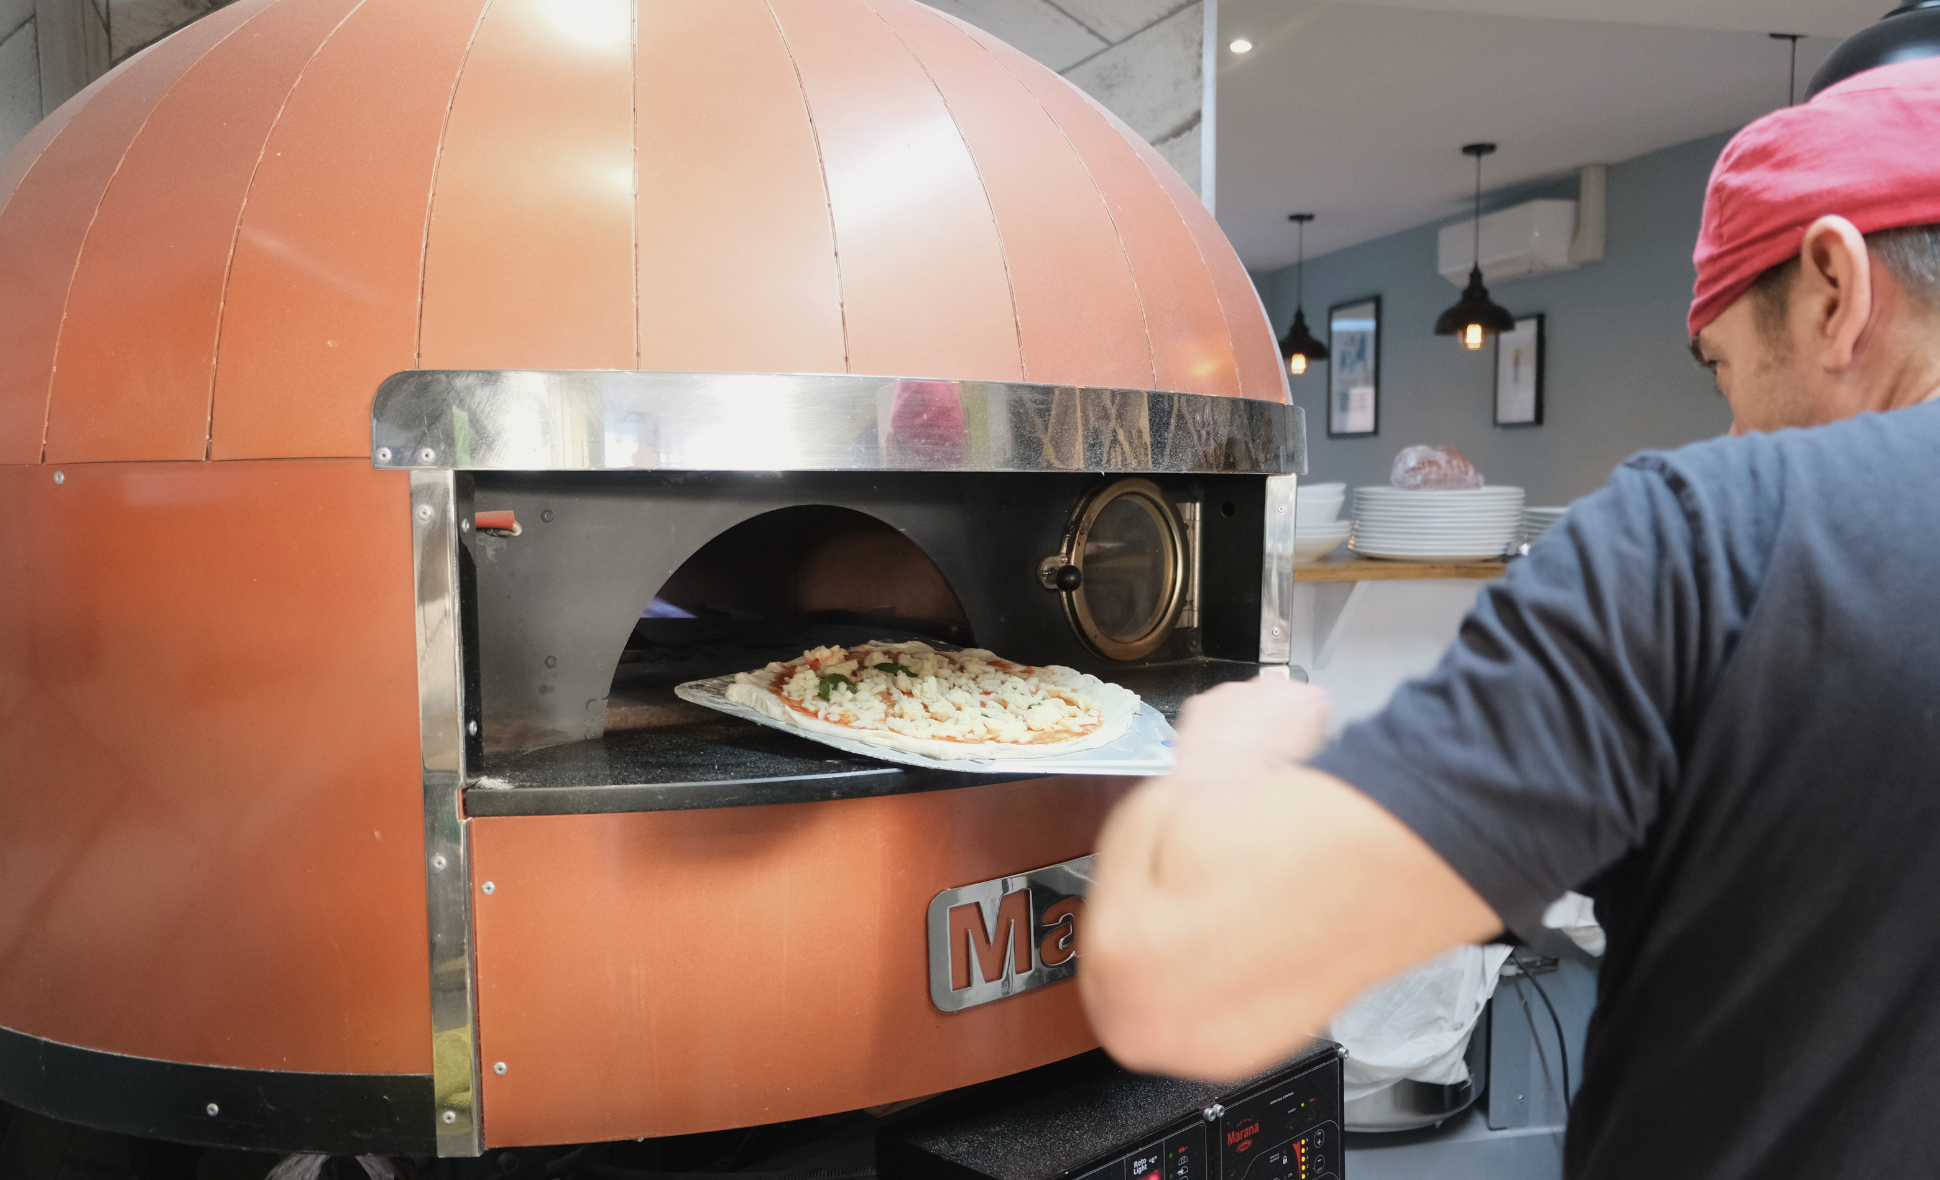 A chef putting a pizza into a pizza oven